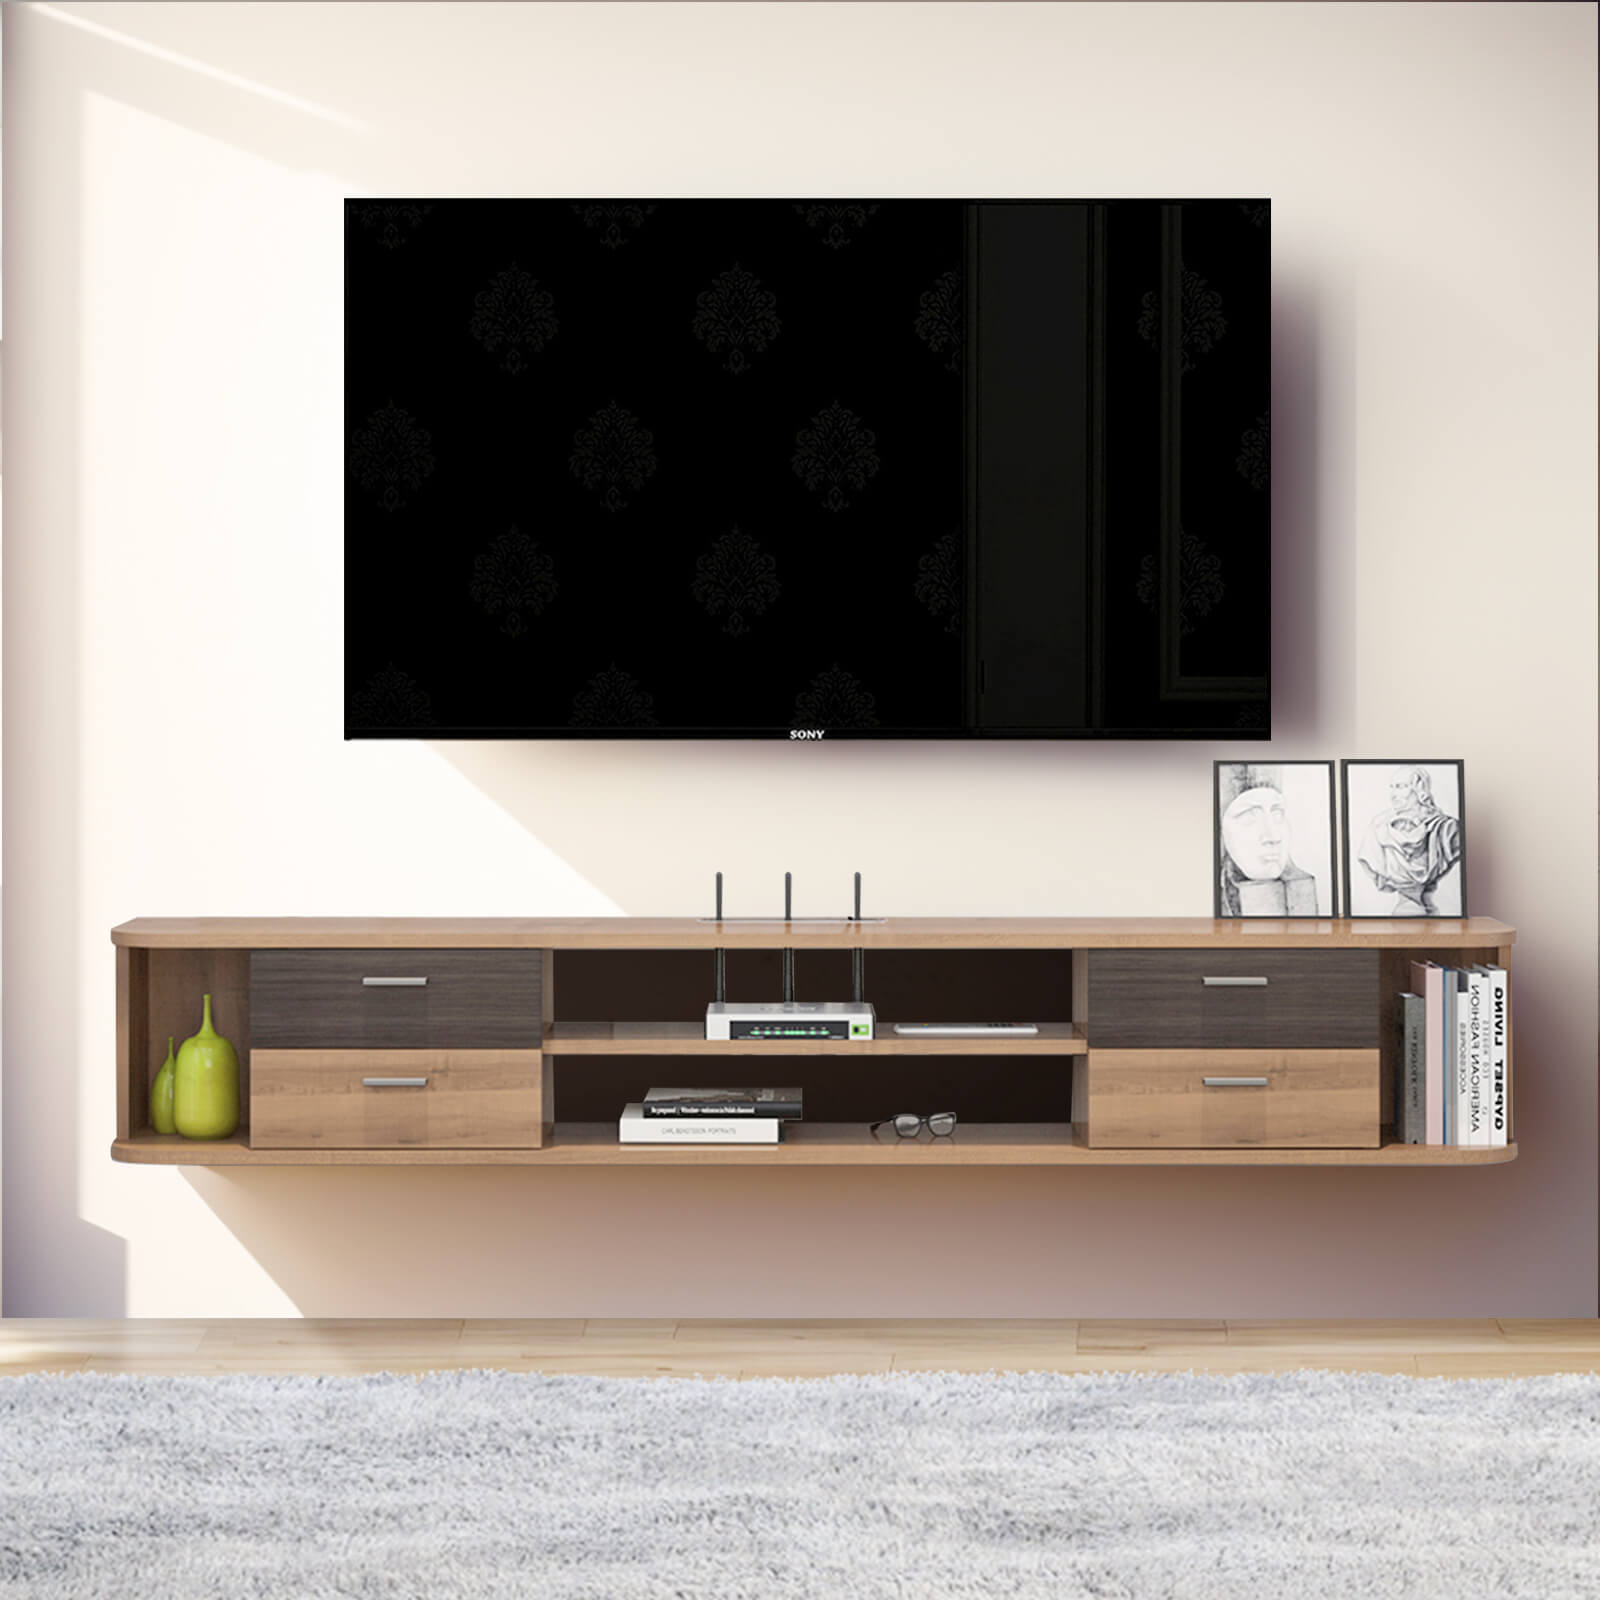 55.90" Plywood Floating TV Stand Shelf with Four Drawers for 55" 60" Televisions, Walnut